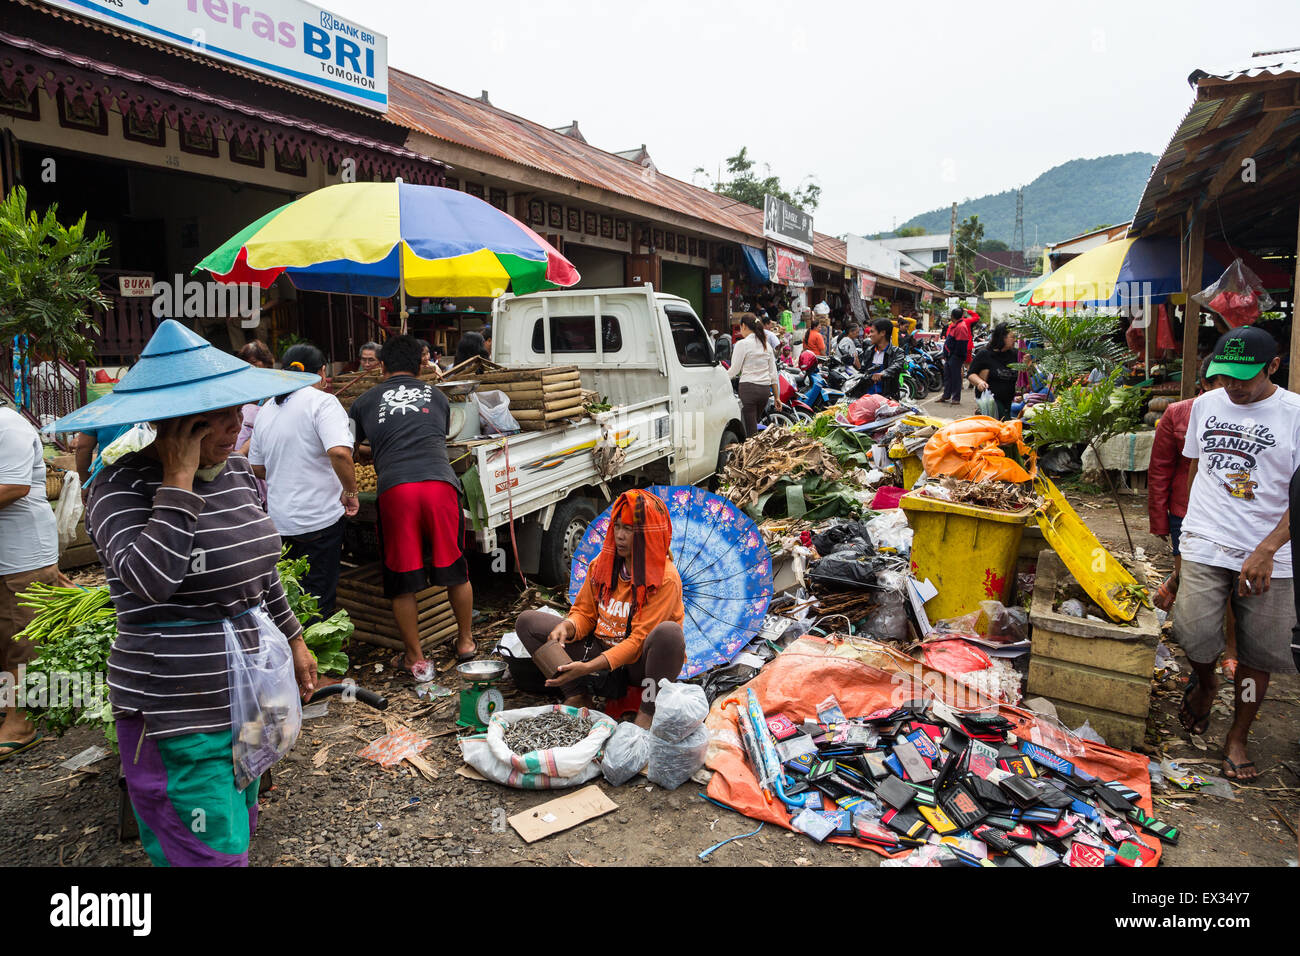 The Tomohon market attracts tourists visiting North Sulawesi, Indonesia with exotic meats, fruits, vegetables and accessories. Stock Photo